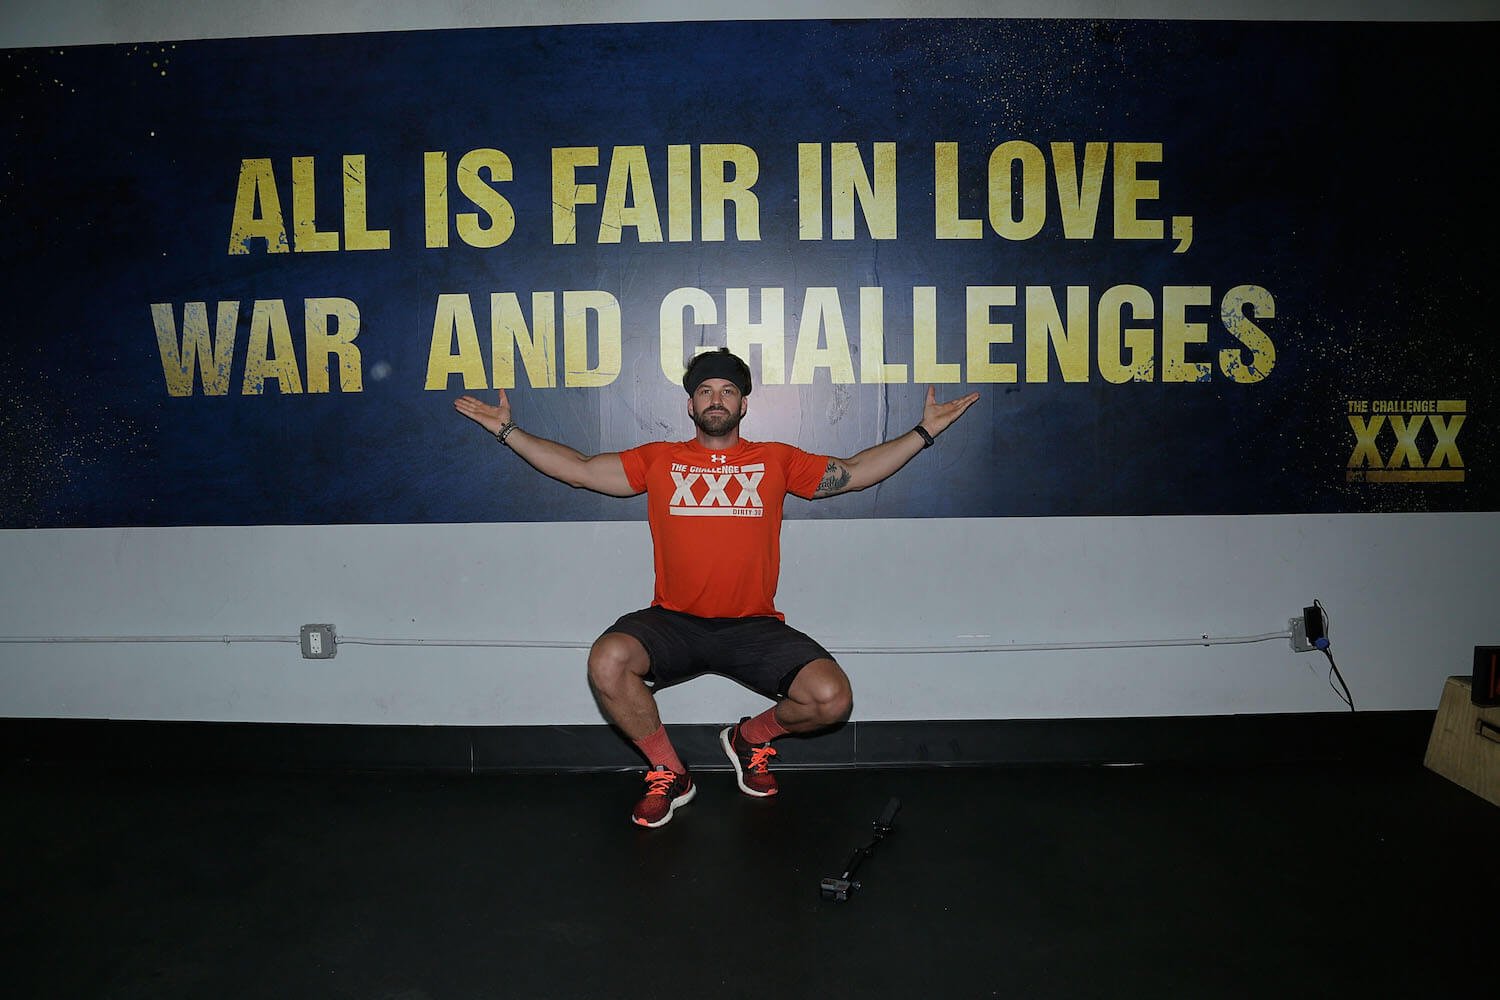 Johnny 'Bananas' Devenanzio from MTV's 'The Challenge' posing in front of a sign that says "All is fair in love, war, and challenges'